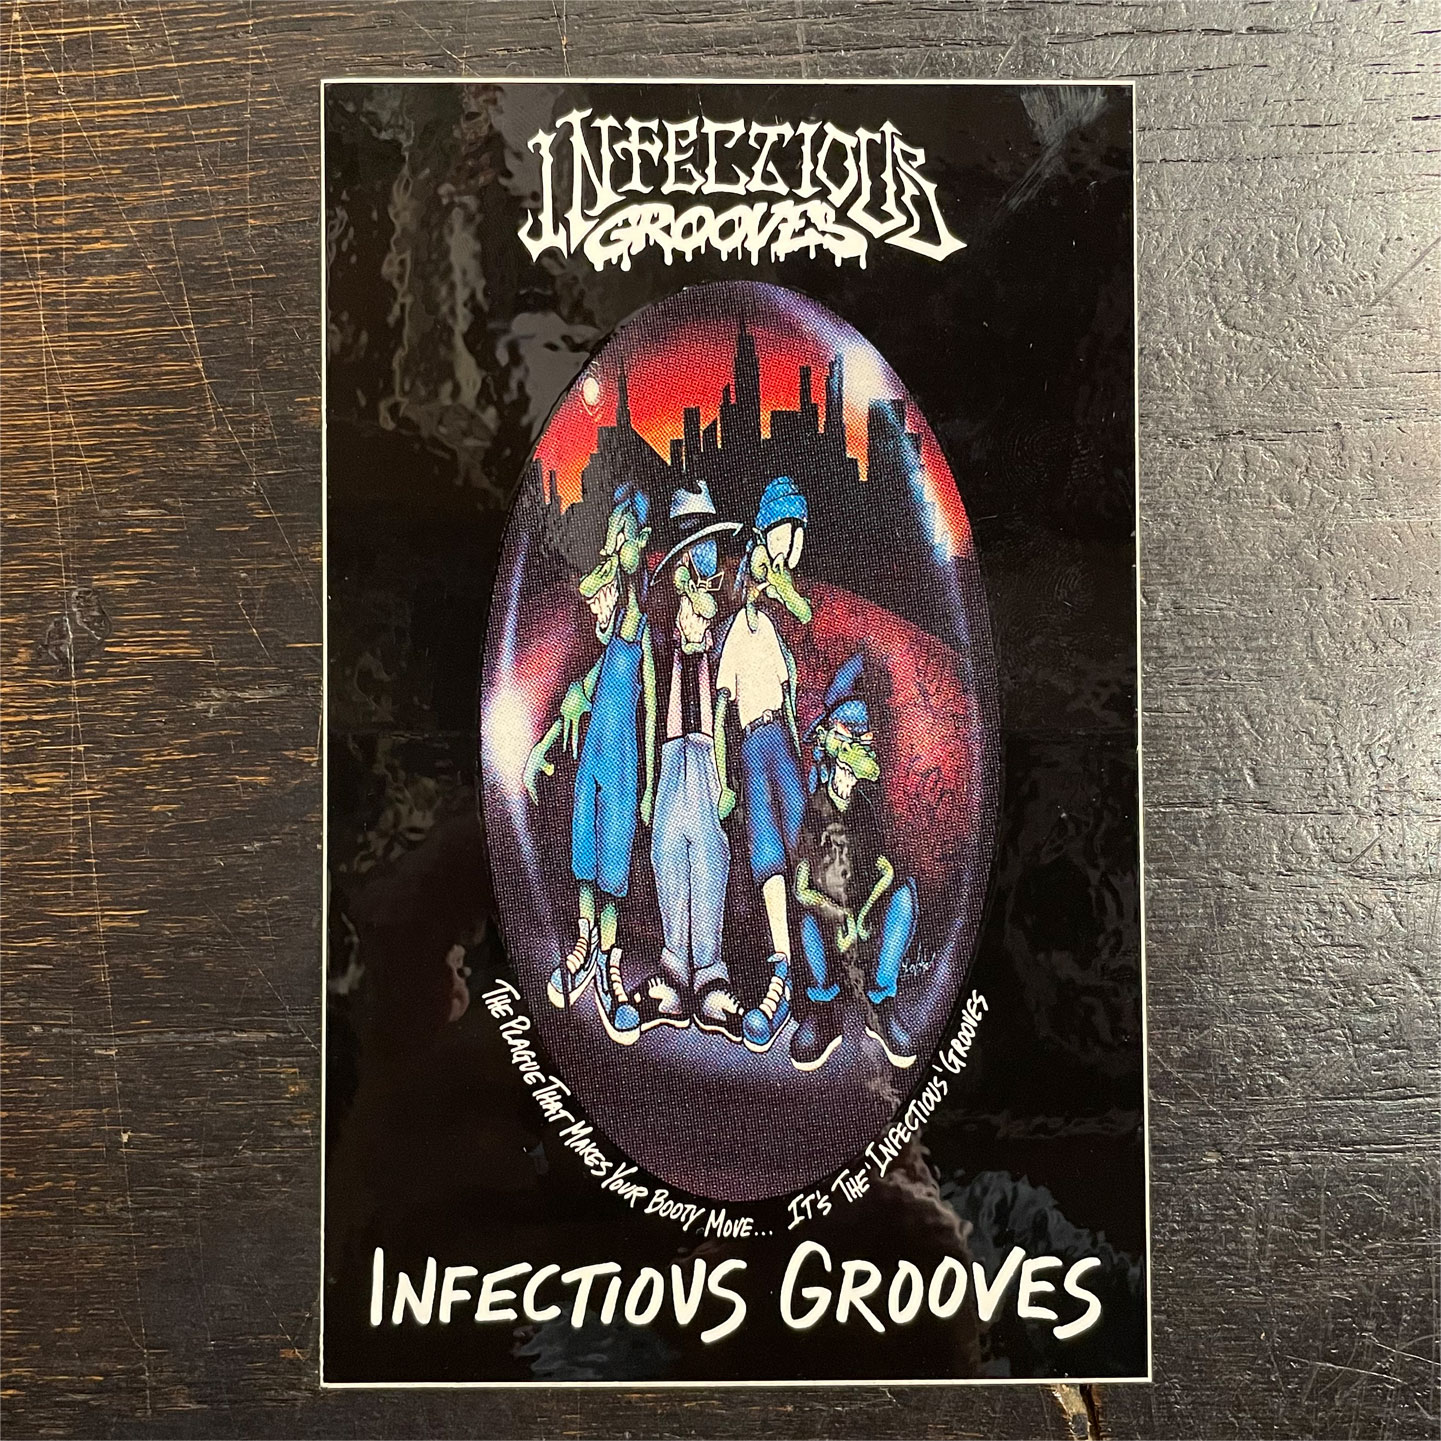 INFECTIOUS GROOVES ステッカー 2